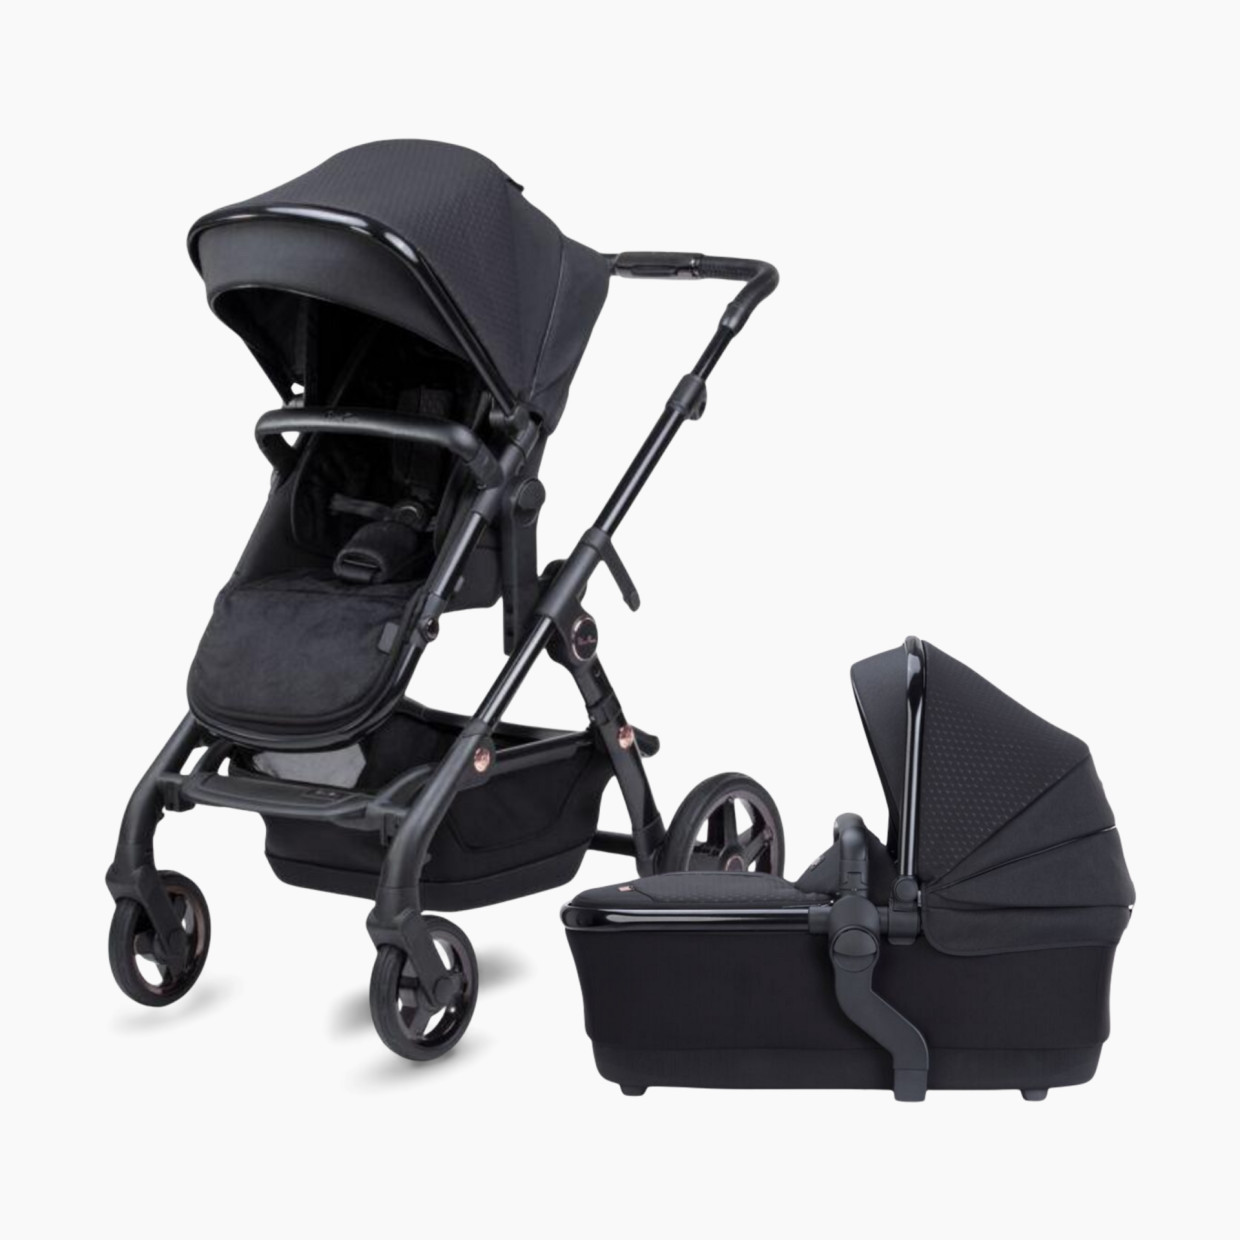 Silver Cross Wave 2022 Single to Double Special Edition Eclipse Stroller - Black/Rose Gold.